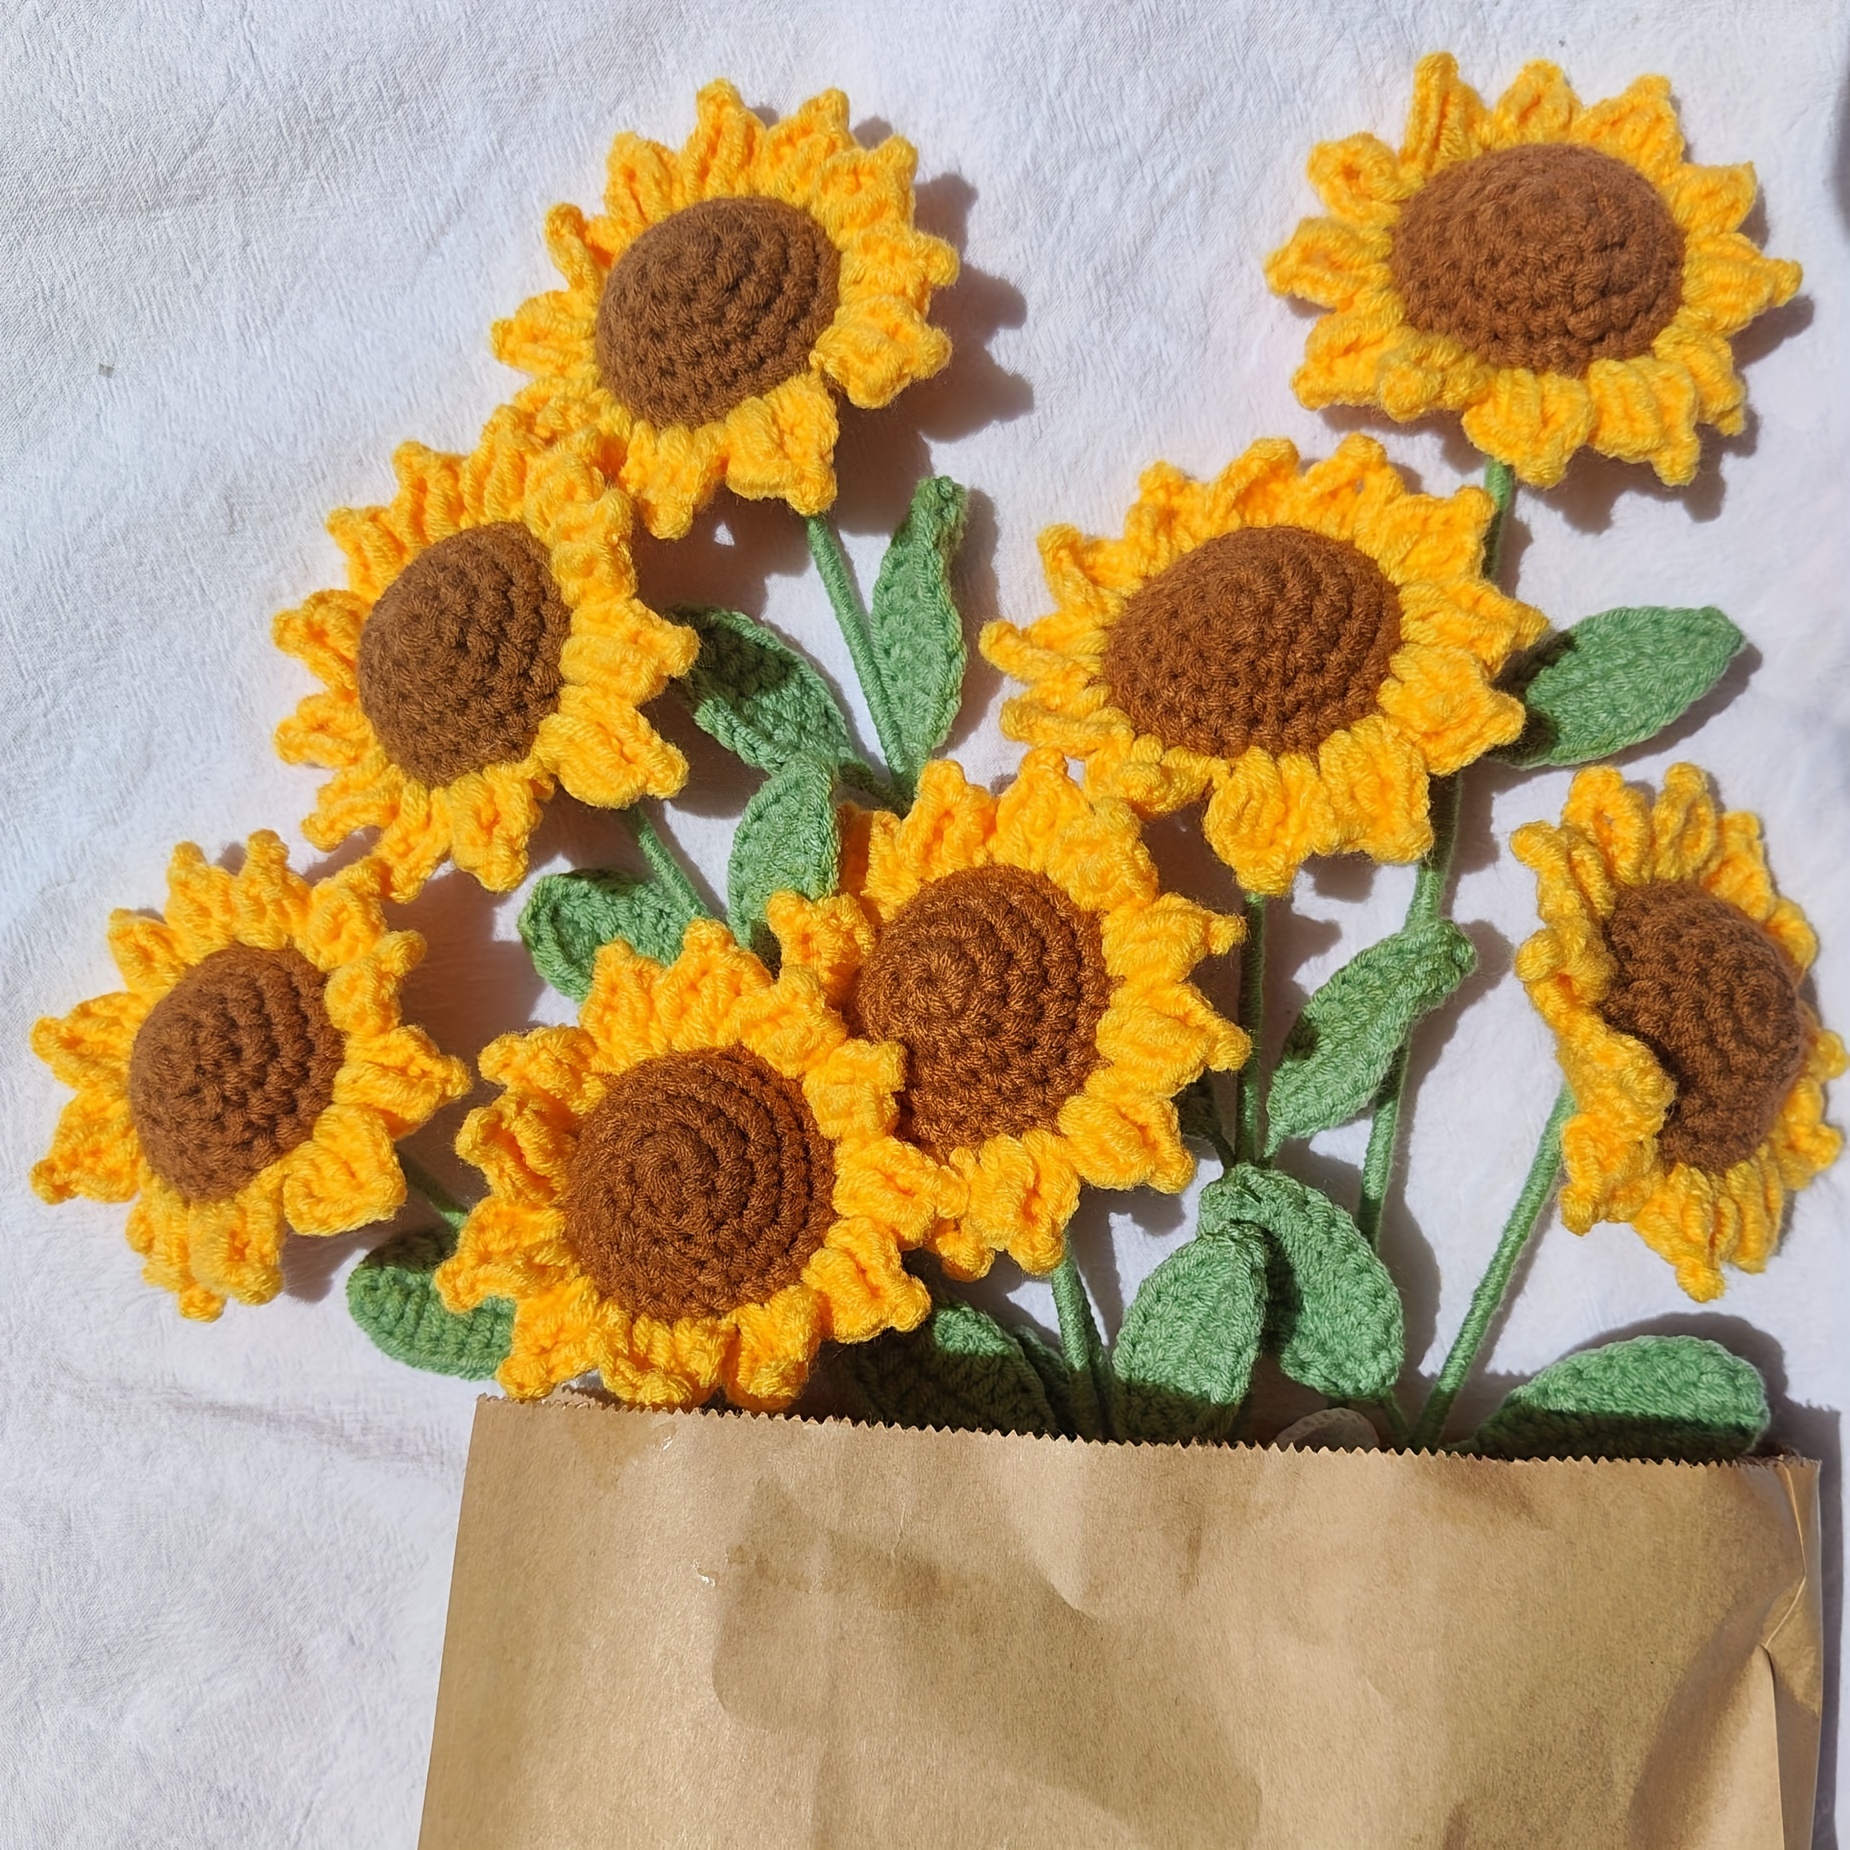 

5pcs Artificial Sunflower With Long Stem, Hand-woven Simulation Flower, Special Gifts For Easter, Mother's Day, Valentine's Day And Other Holiday Party Decoration